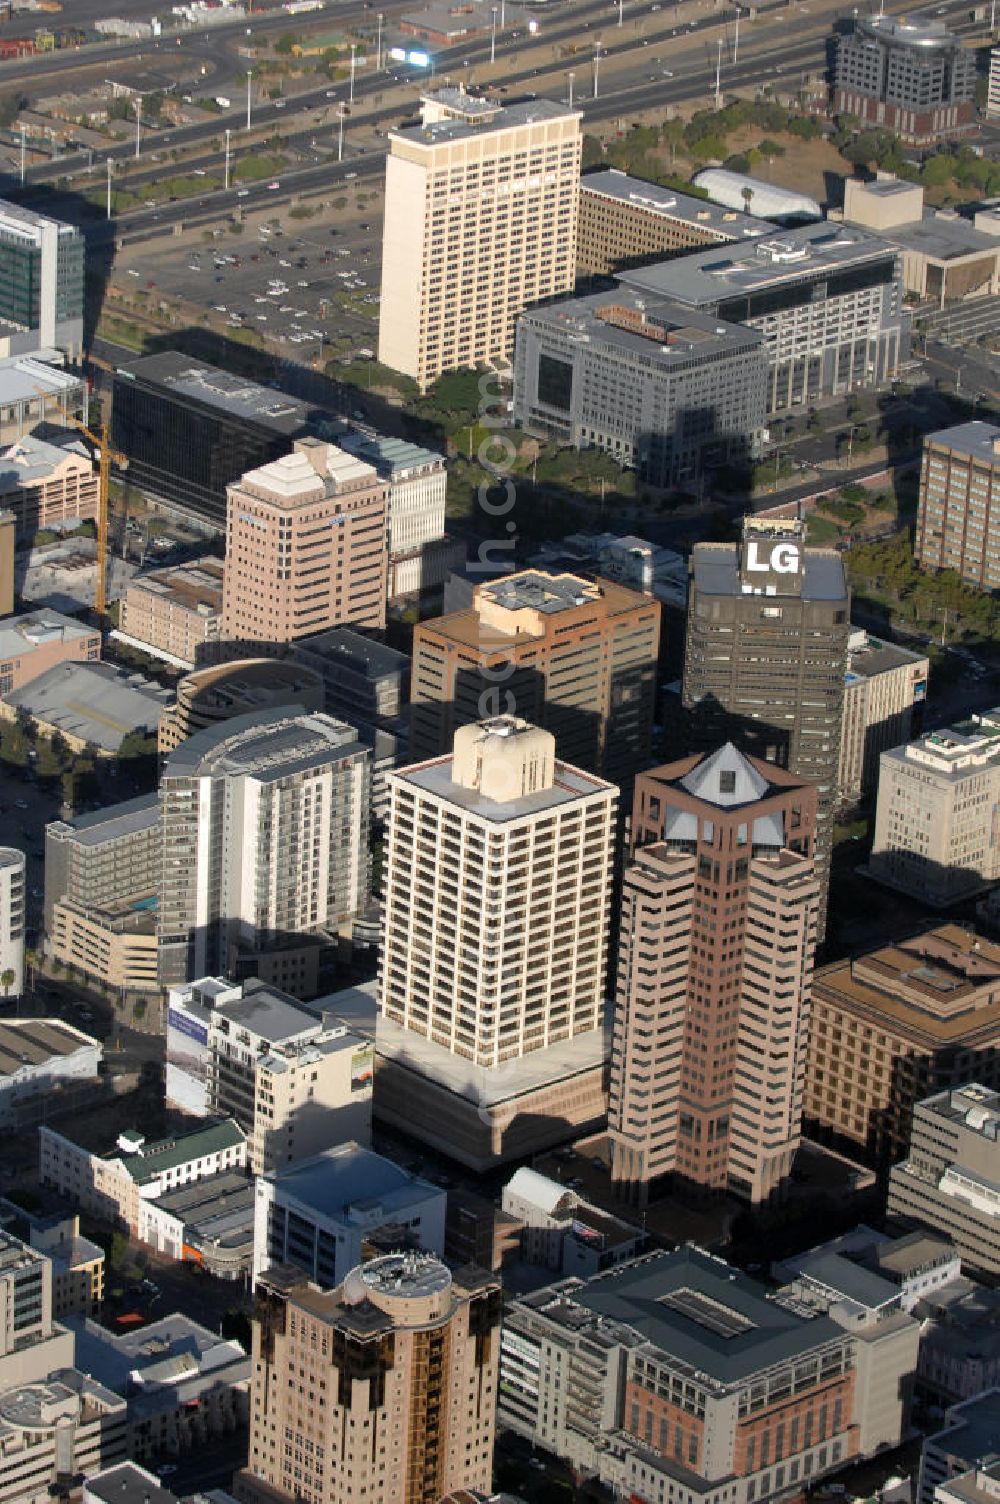 Aerial photograph Kapstadt - CAPE TOWN 17.02.2010 High-rise buildings in Downtown Cape Town at N2 Road: among others the 2 Long Street Building, the Triangel House Building, the head office of Engen Petroleum, the Icon Hotel Cape Town and the 1 Thibault Square Building